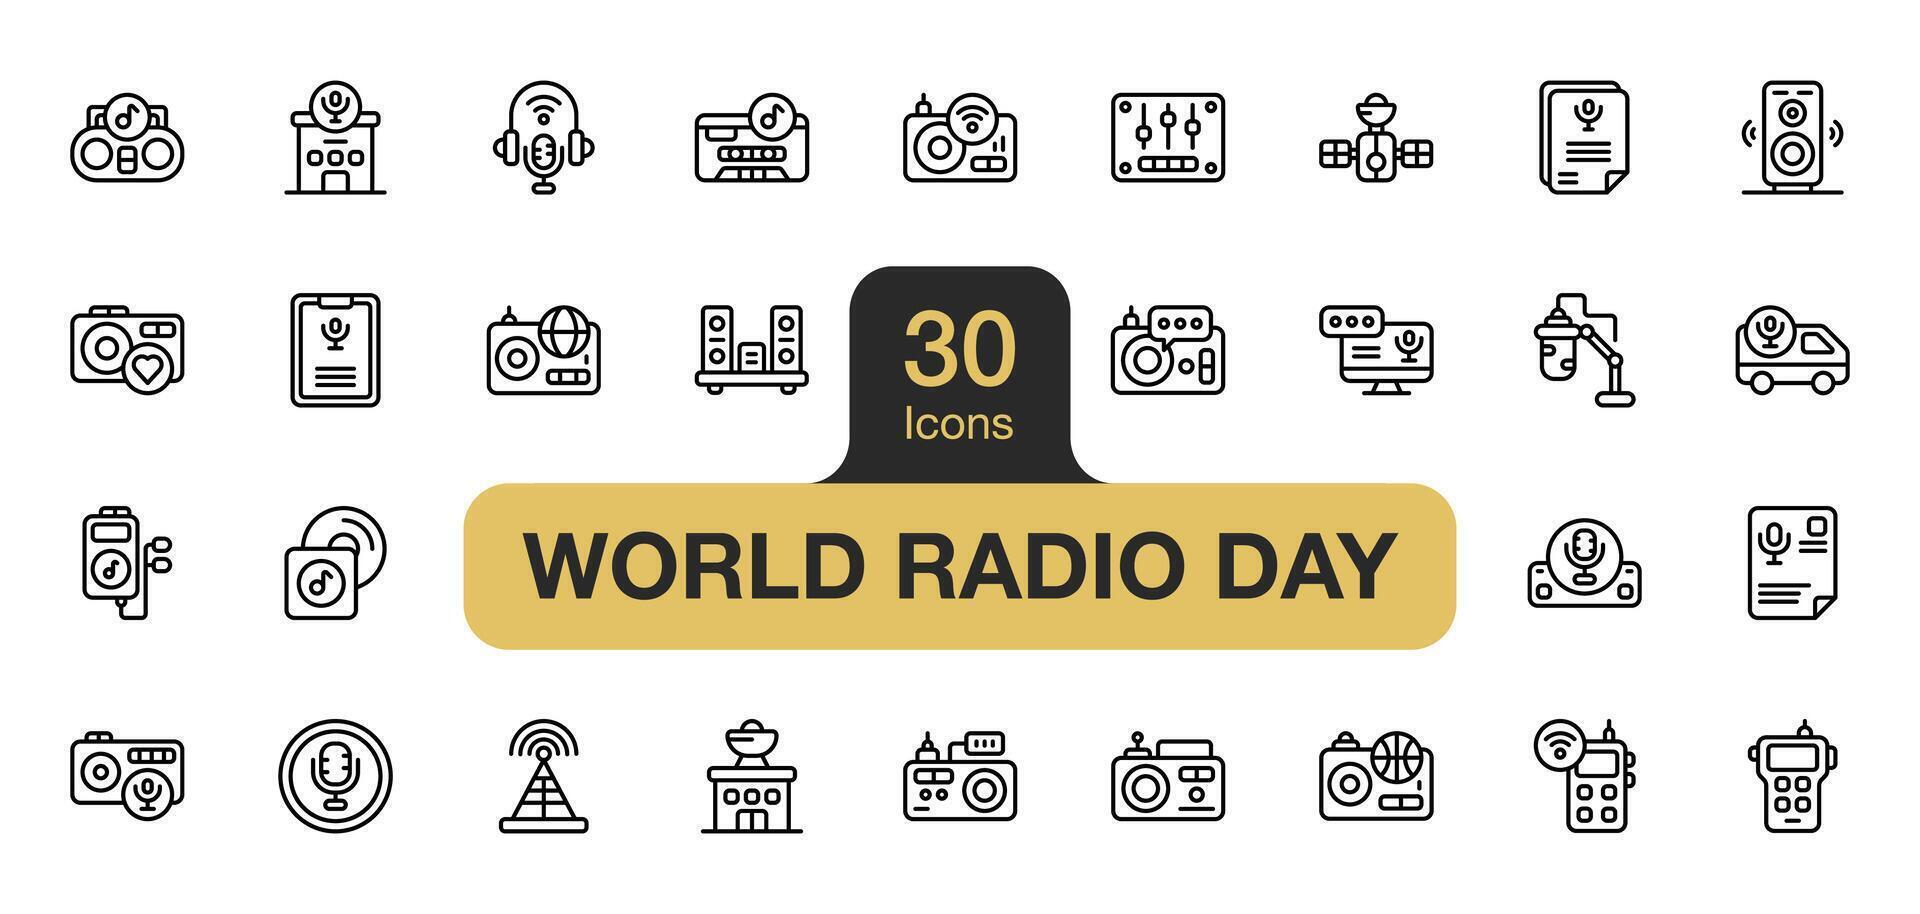 Set of 30 World radio day icon element sets. Includes live, on air, speaker, radio station, cassette, equalizer, radio transmitter, music album, and More. Outline icons vector collection.